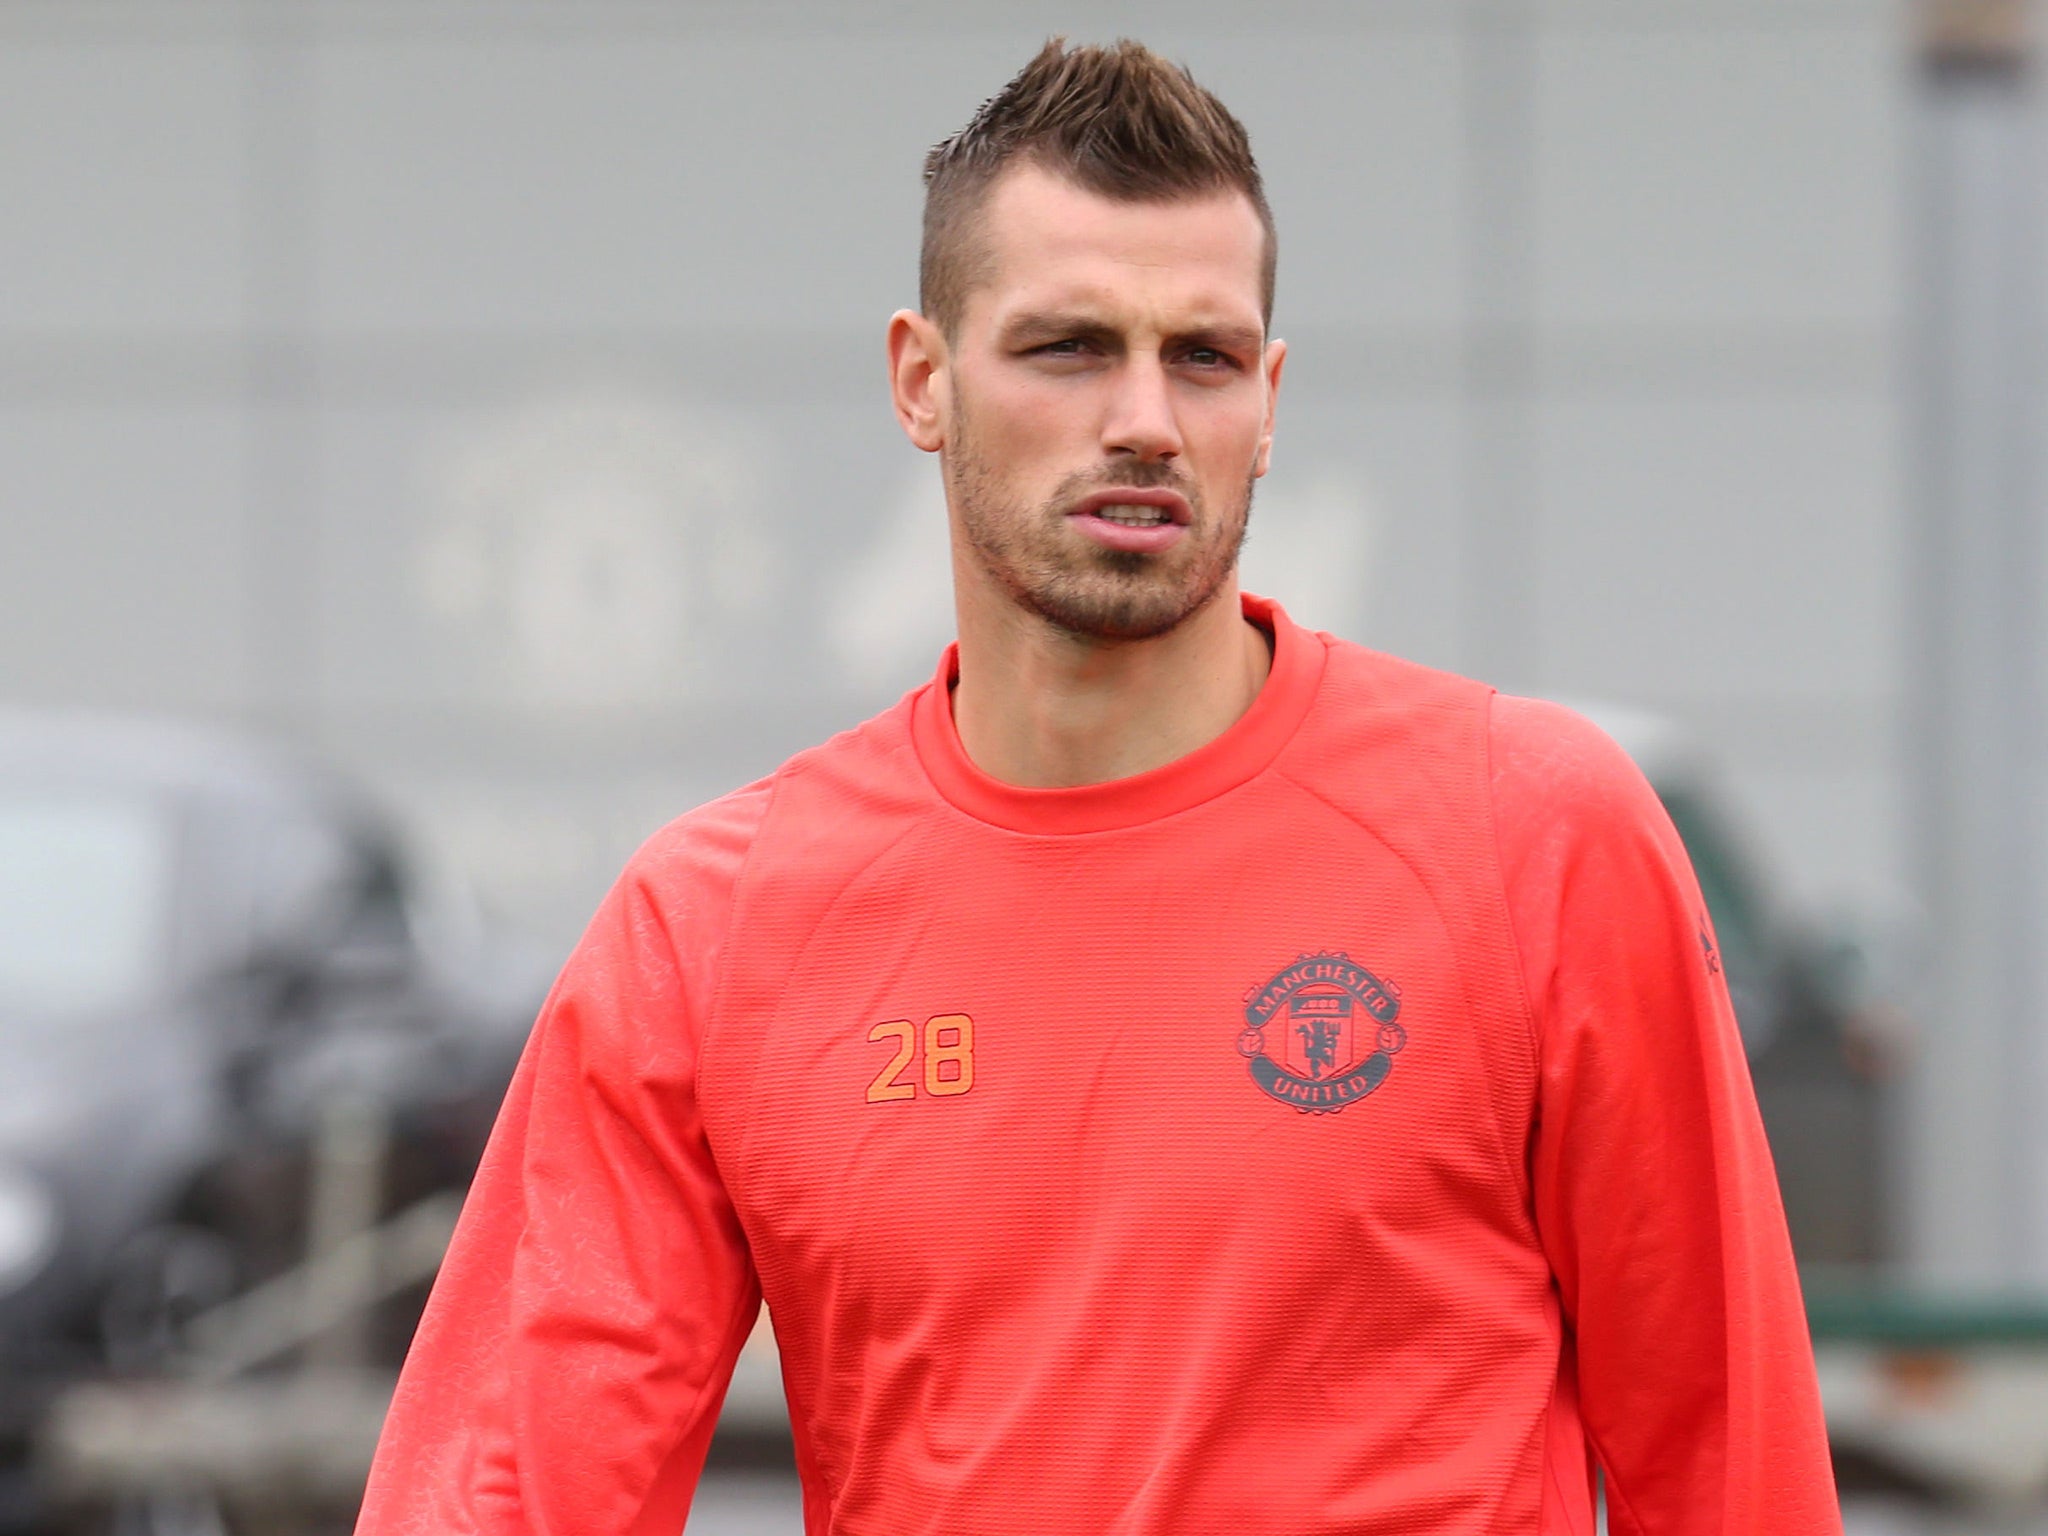 Schneiderlin will be reunited with Ronald Koeman, his former manager at Southampton